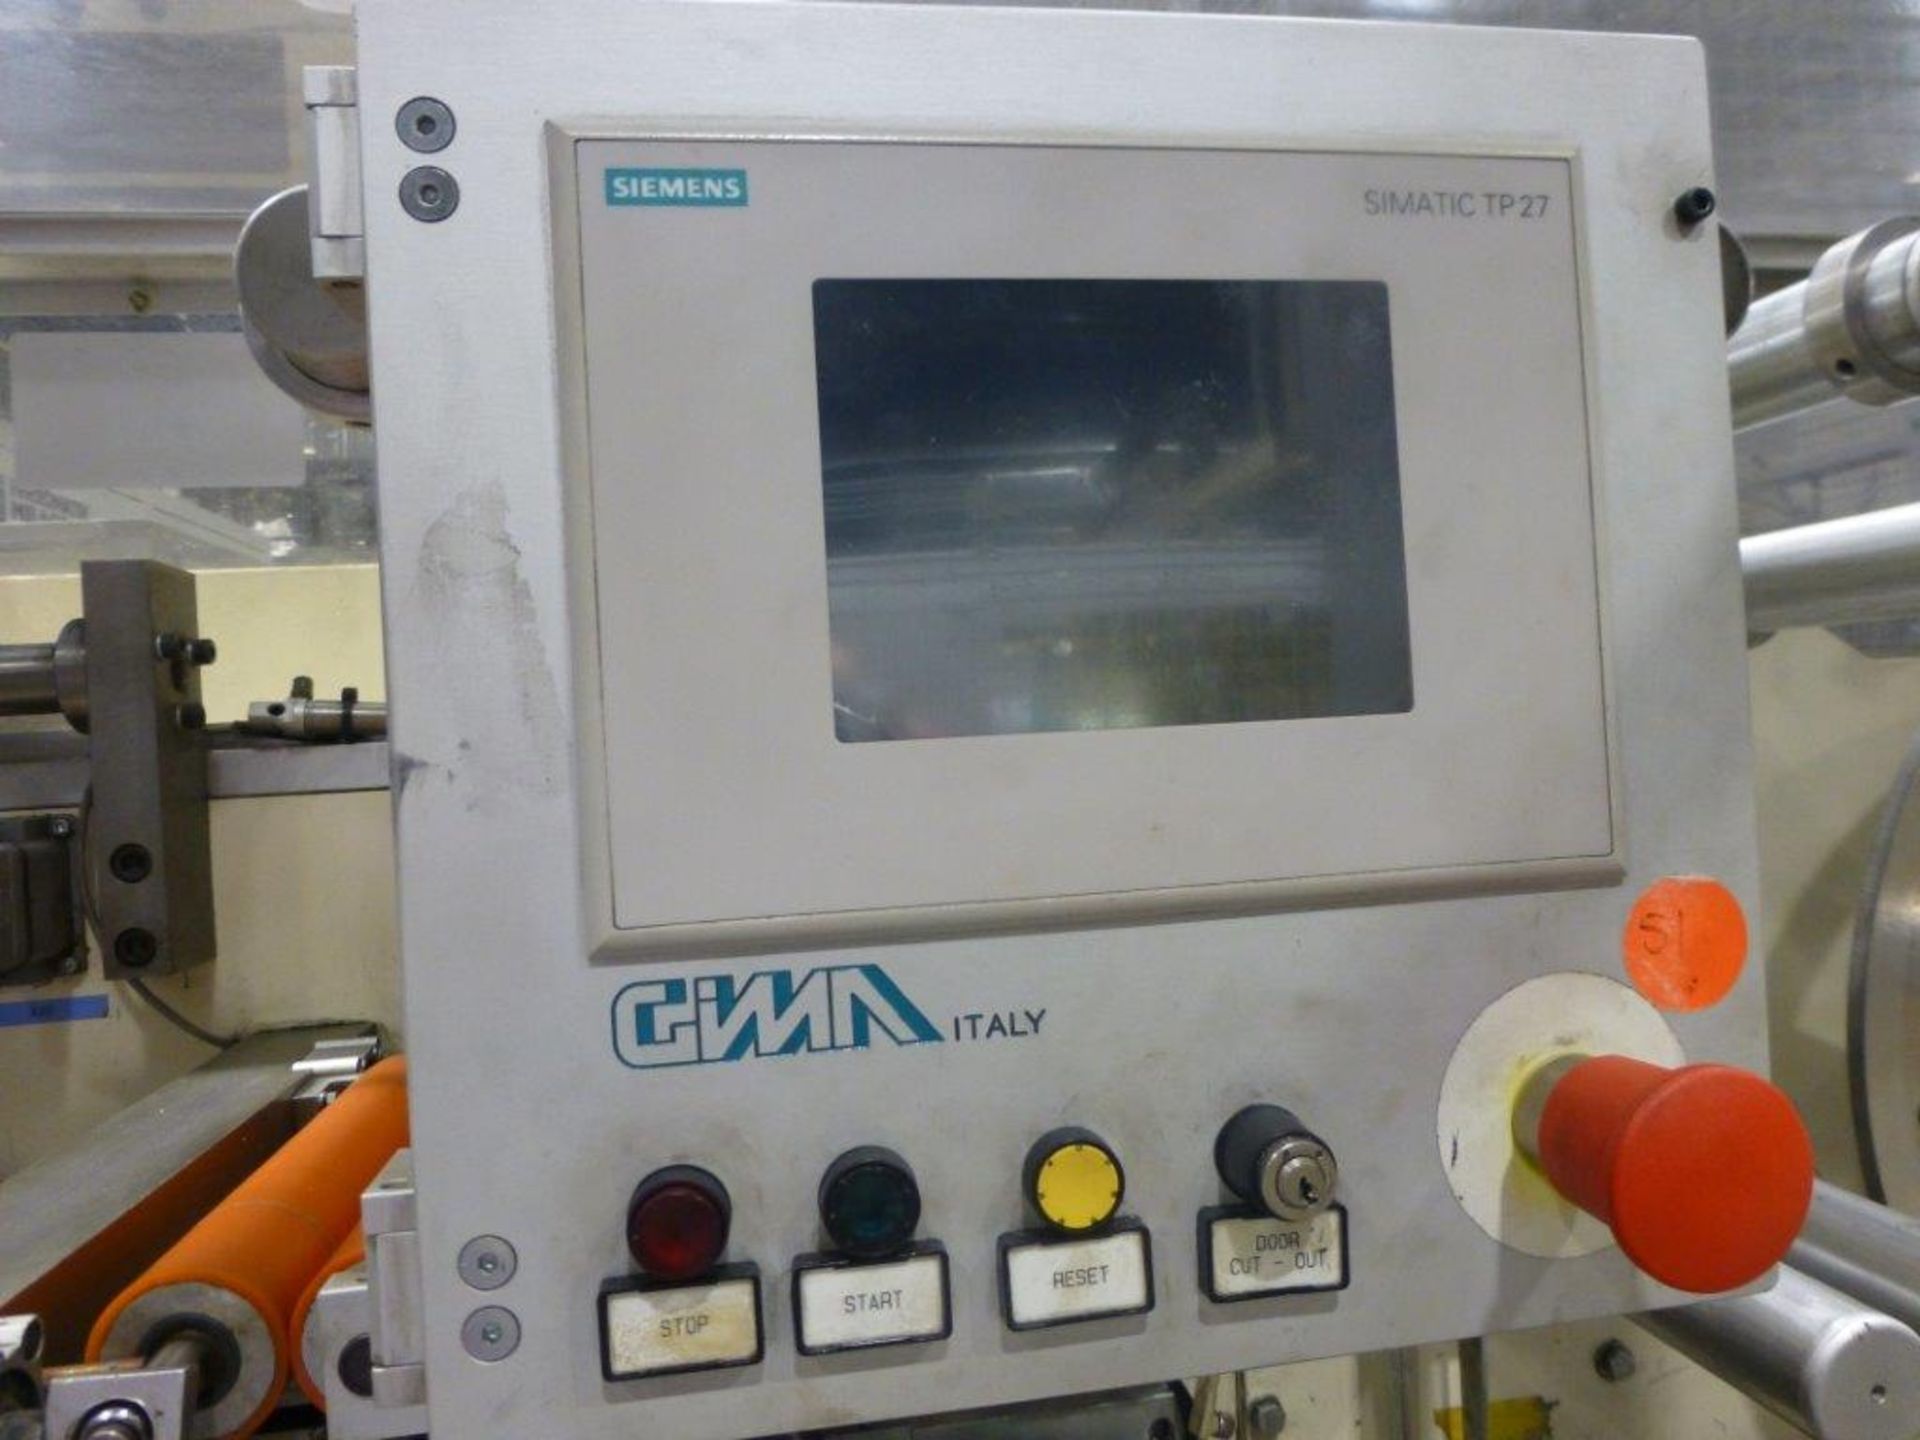 GIMA Type 884 DVD CNC Rotary Thermal Welding Machine Serial No. 88461CO (2002) with flip unit and - Image 5 of 6